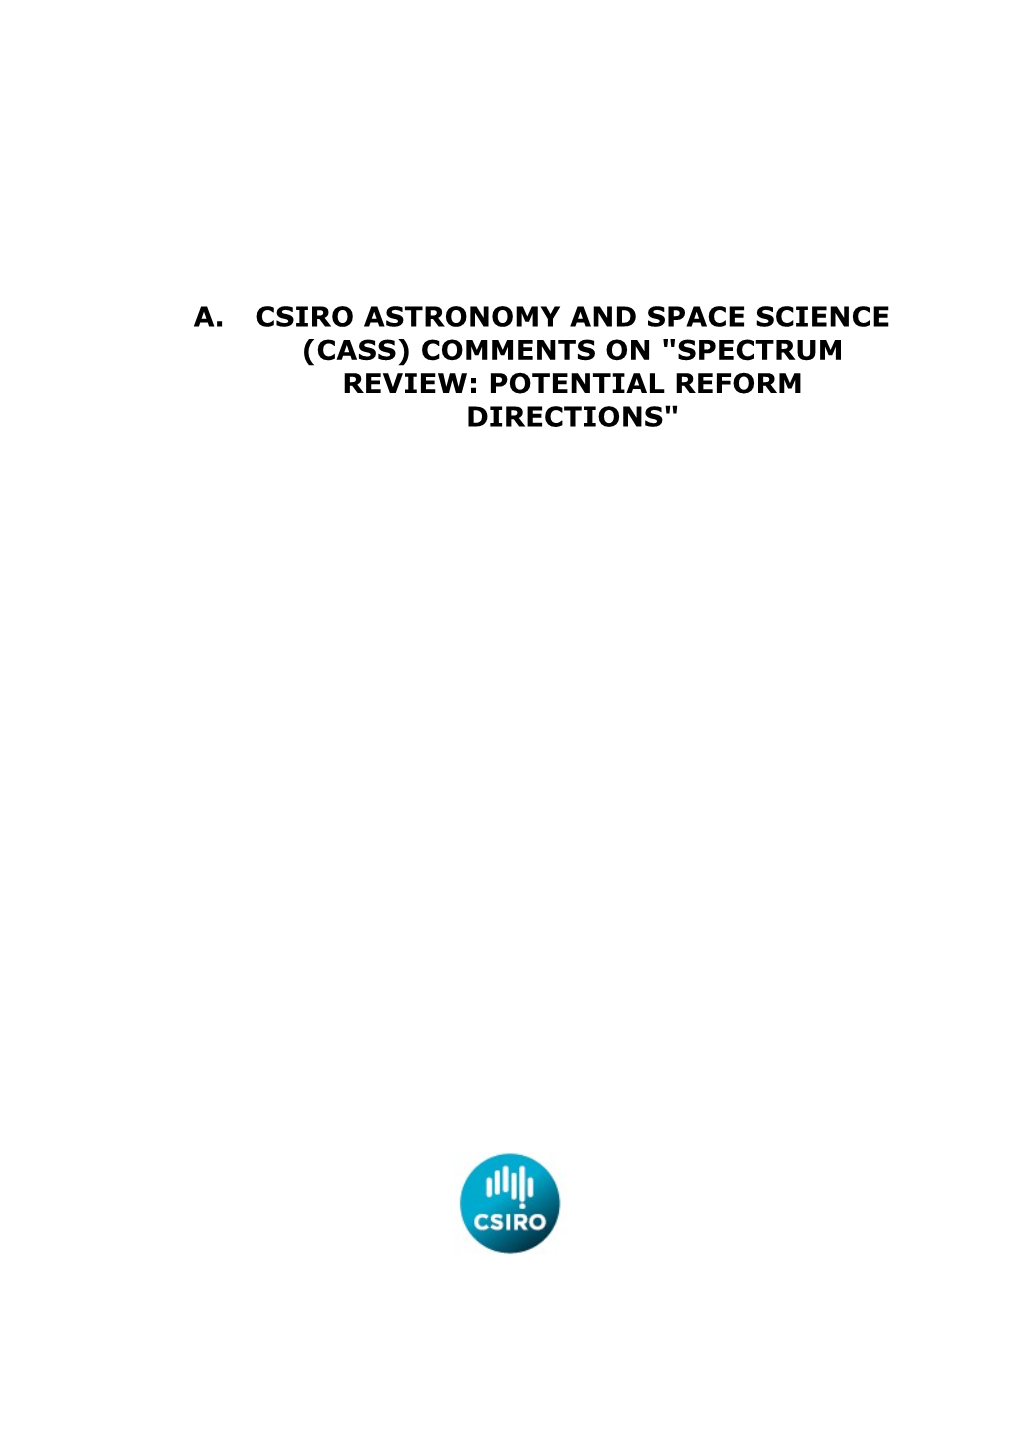 CSIRO Astronomy and Space Science (CASS) Comments on Spectrum Review: Potential Reform